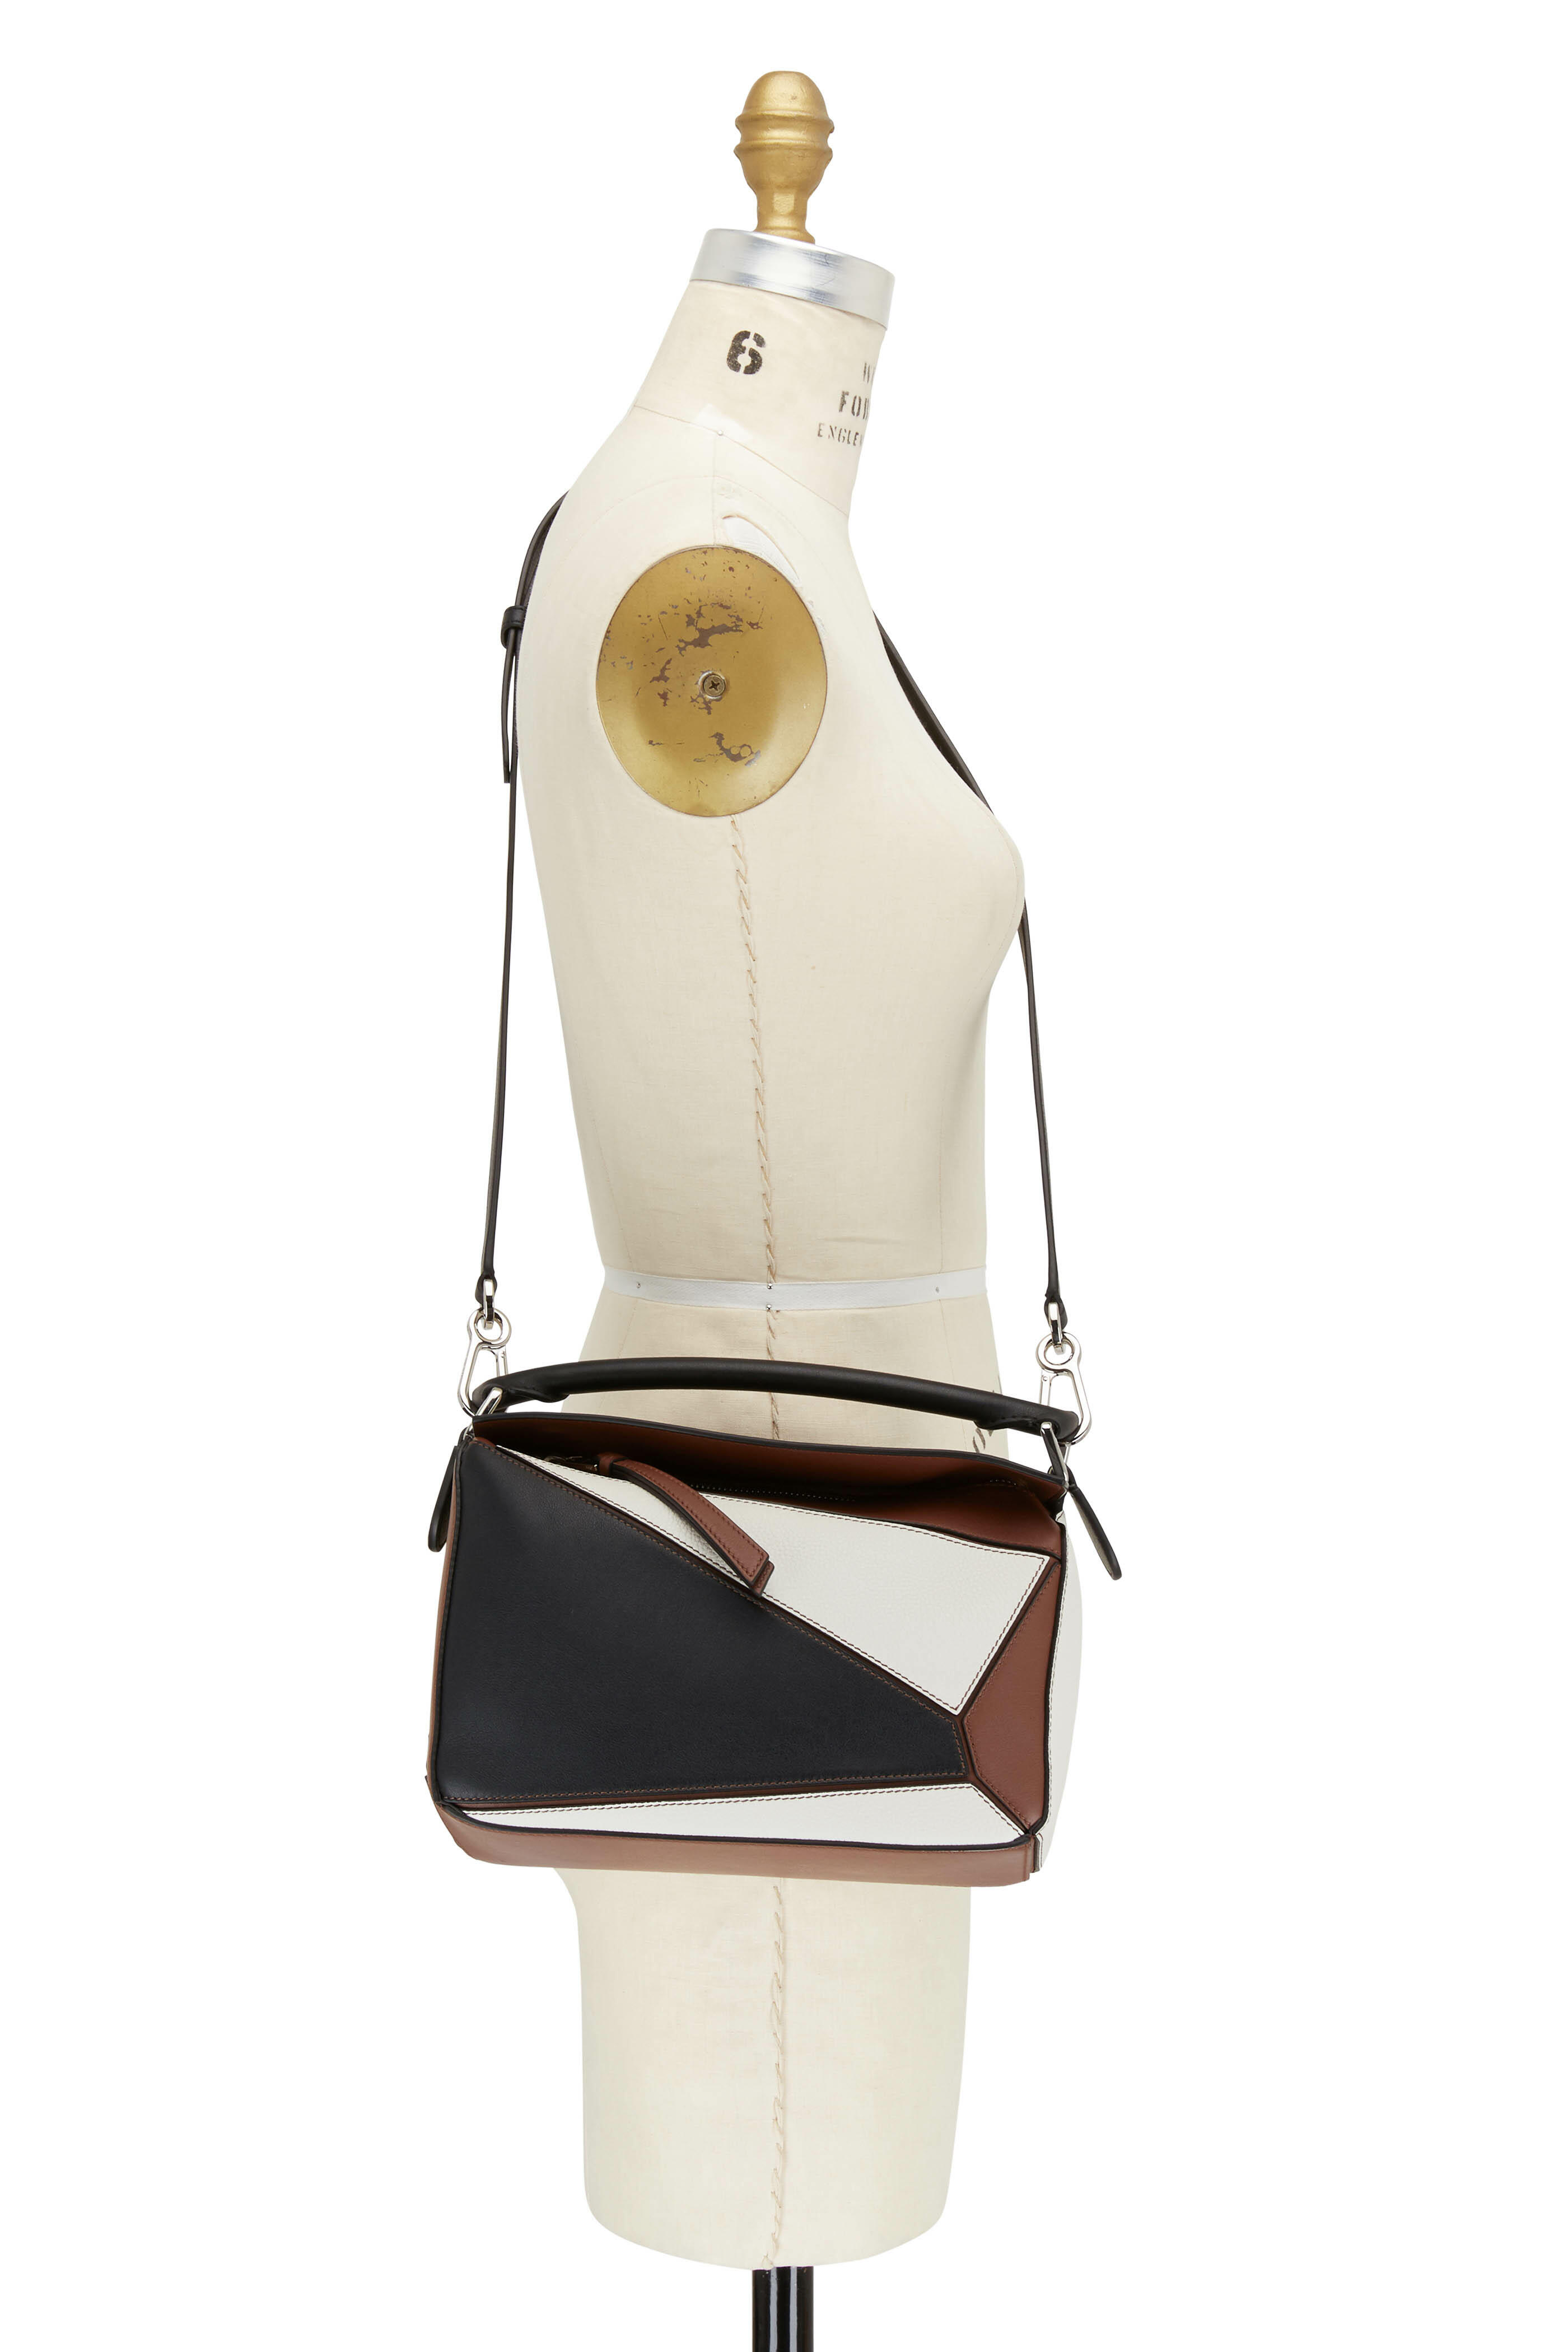 LOEWE black and brown Puzzle small leather shoulder bag